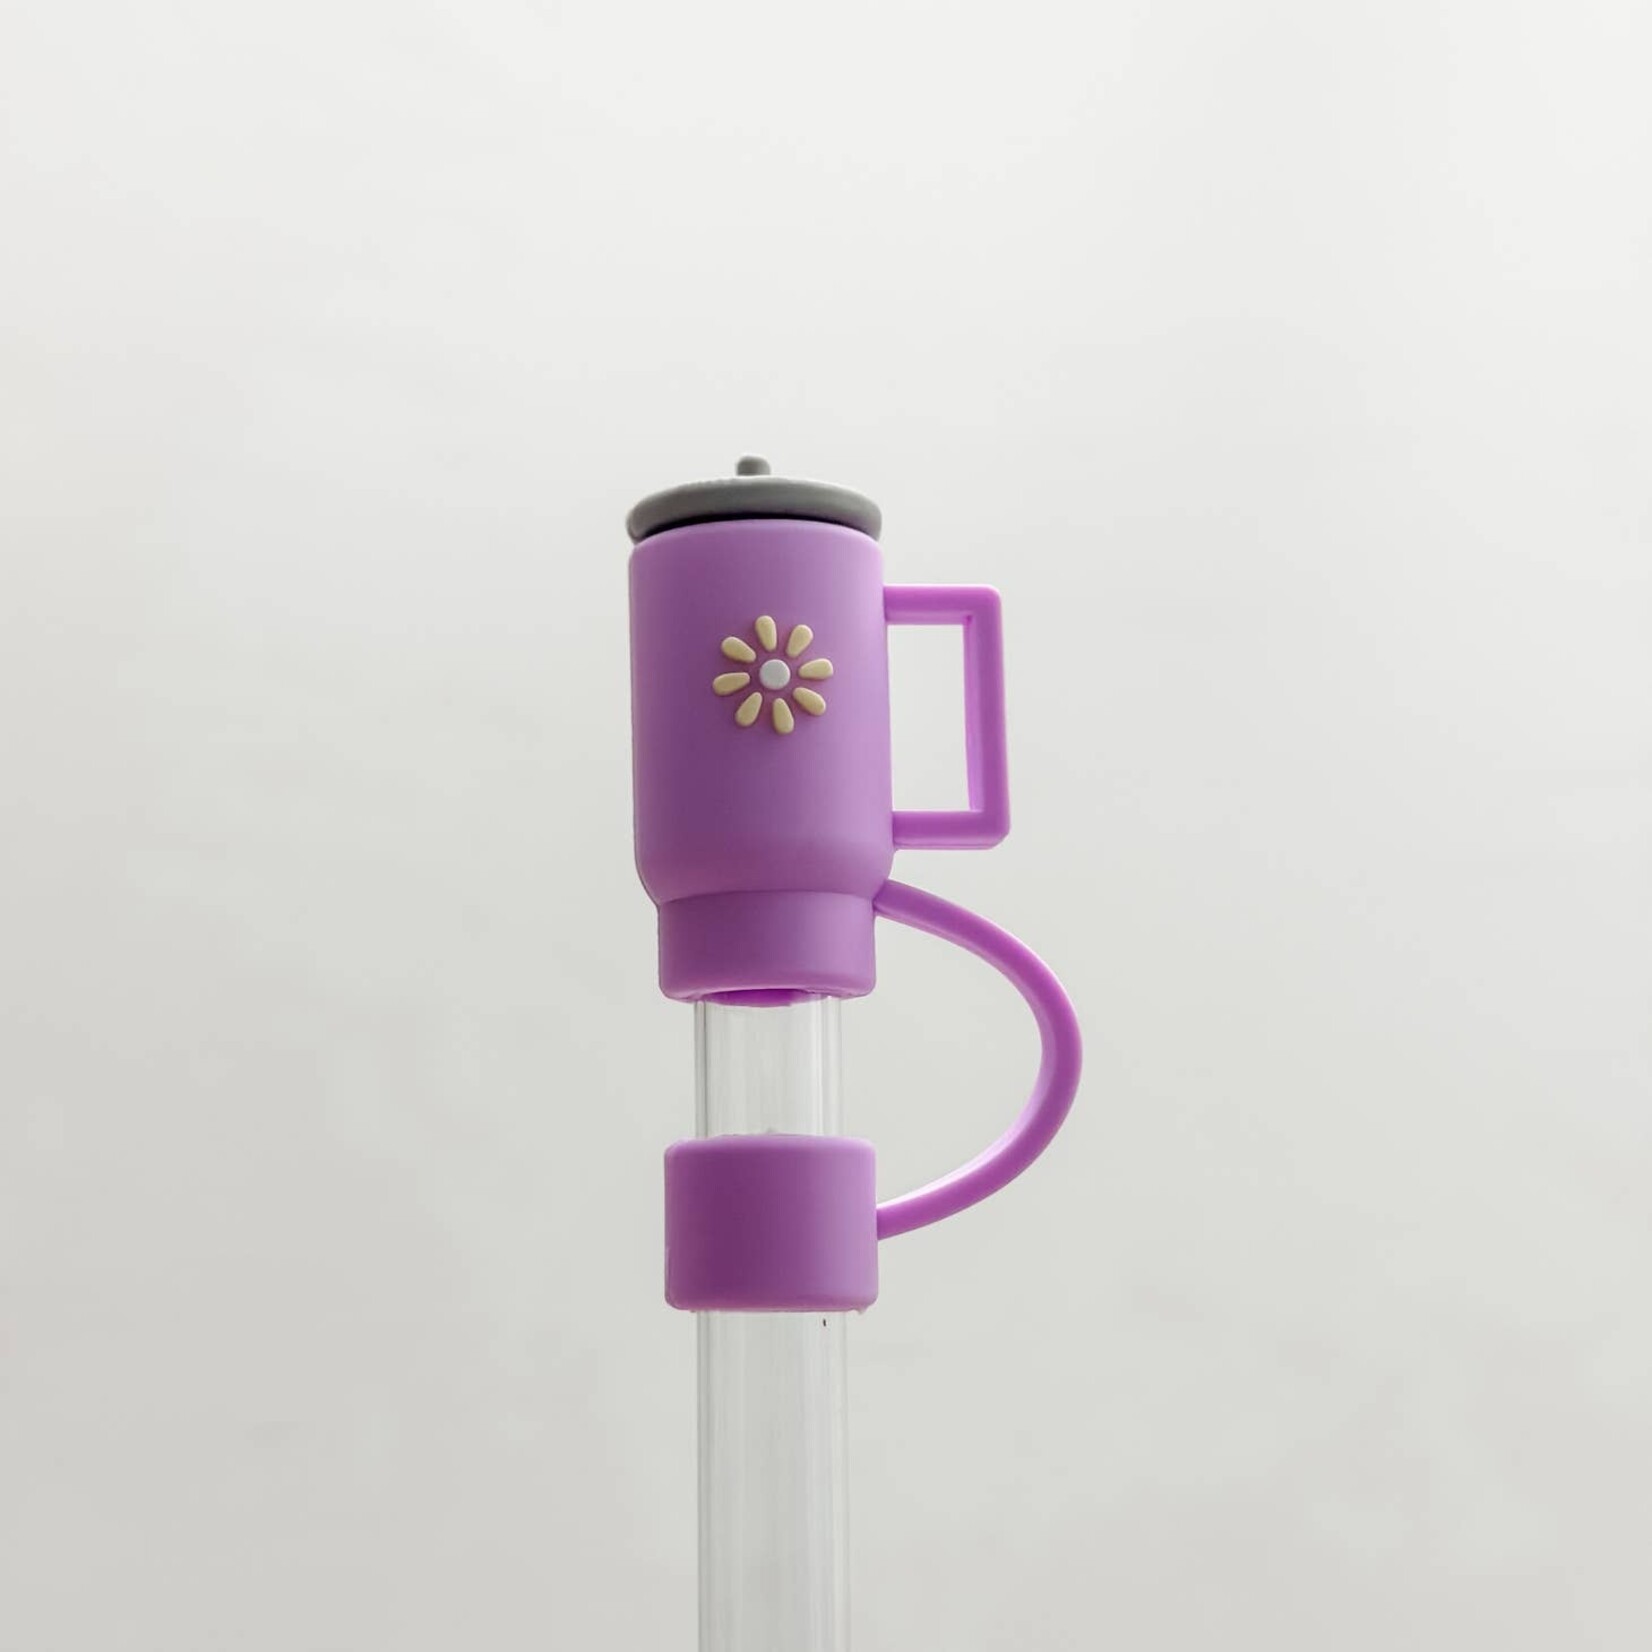 Harris Girls & Co - Straw Cover - Purple Cup